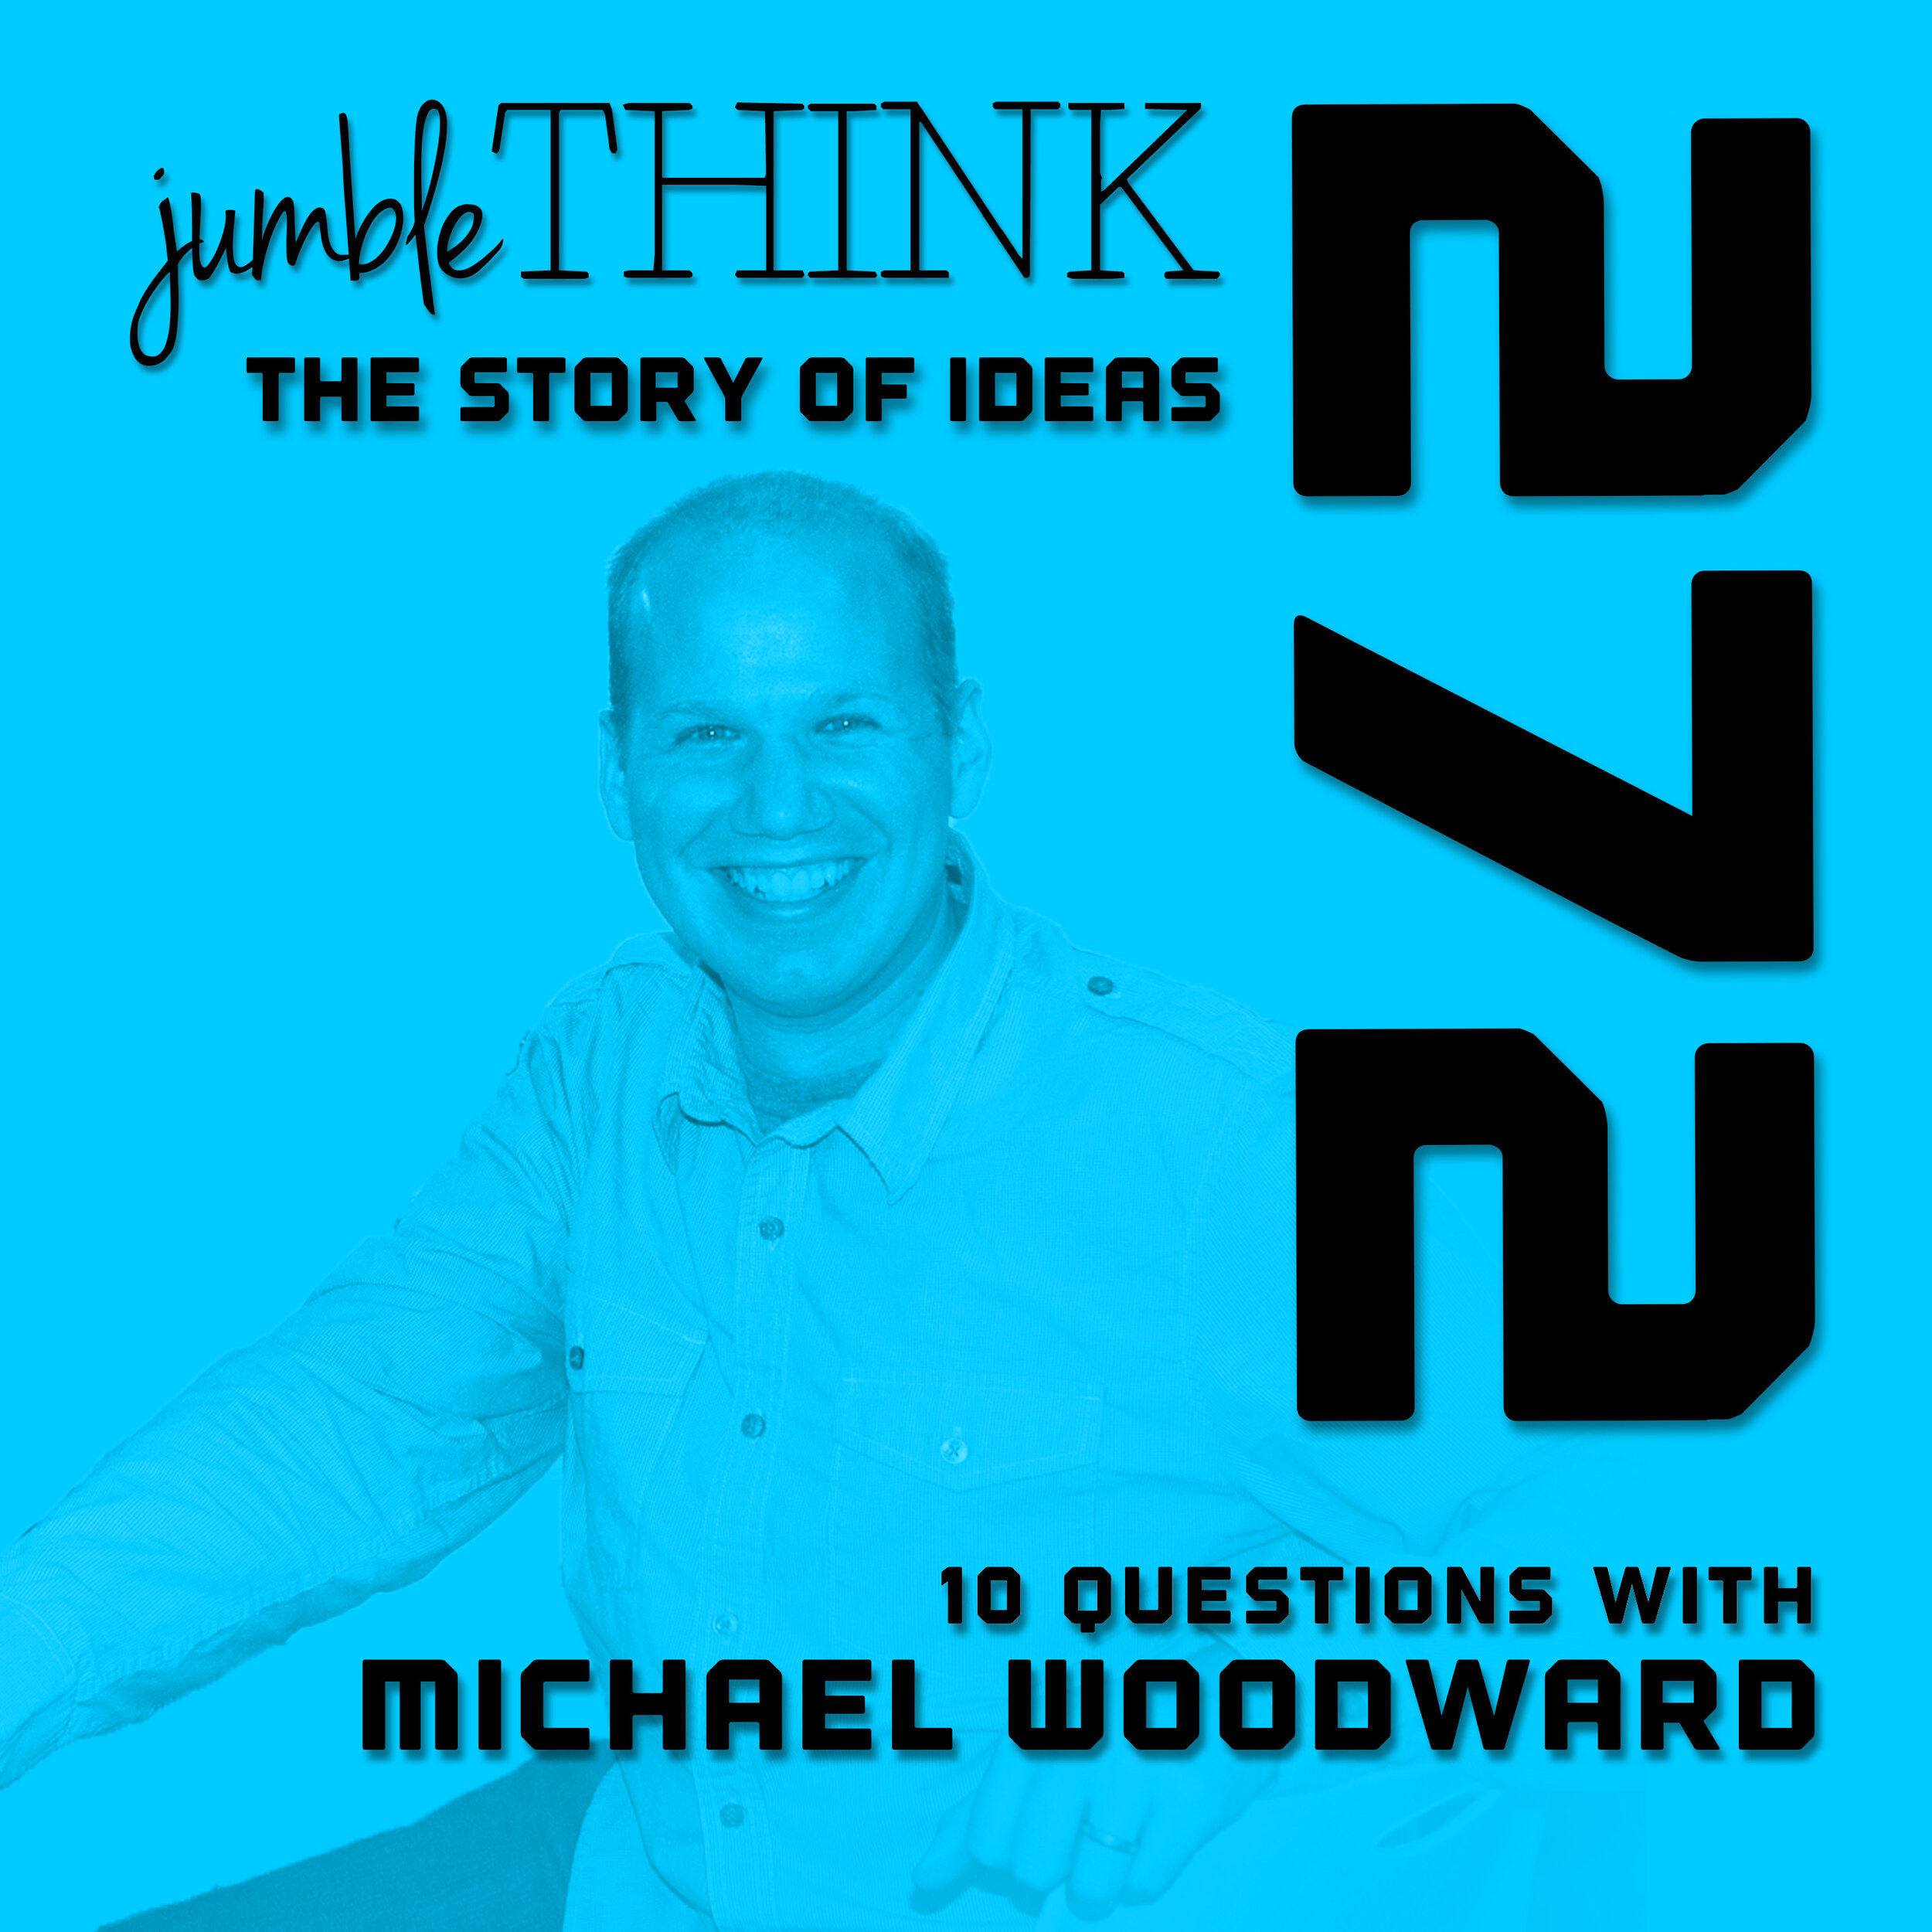 10 Questions with Michael Woodward